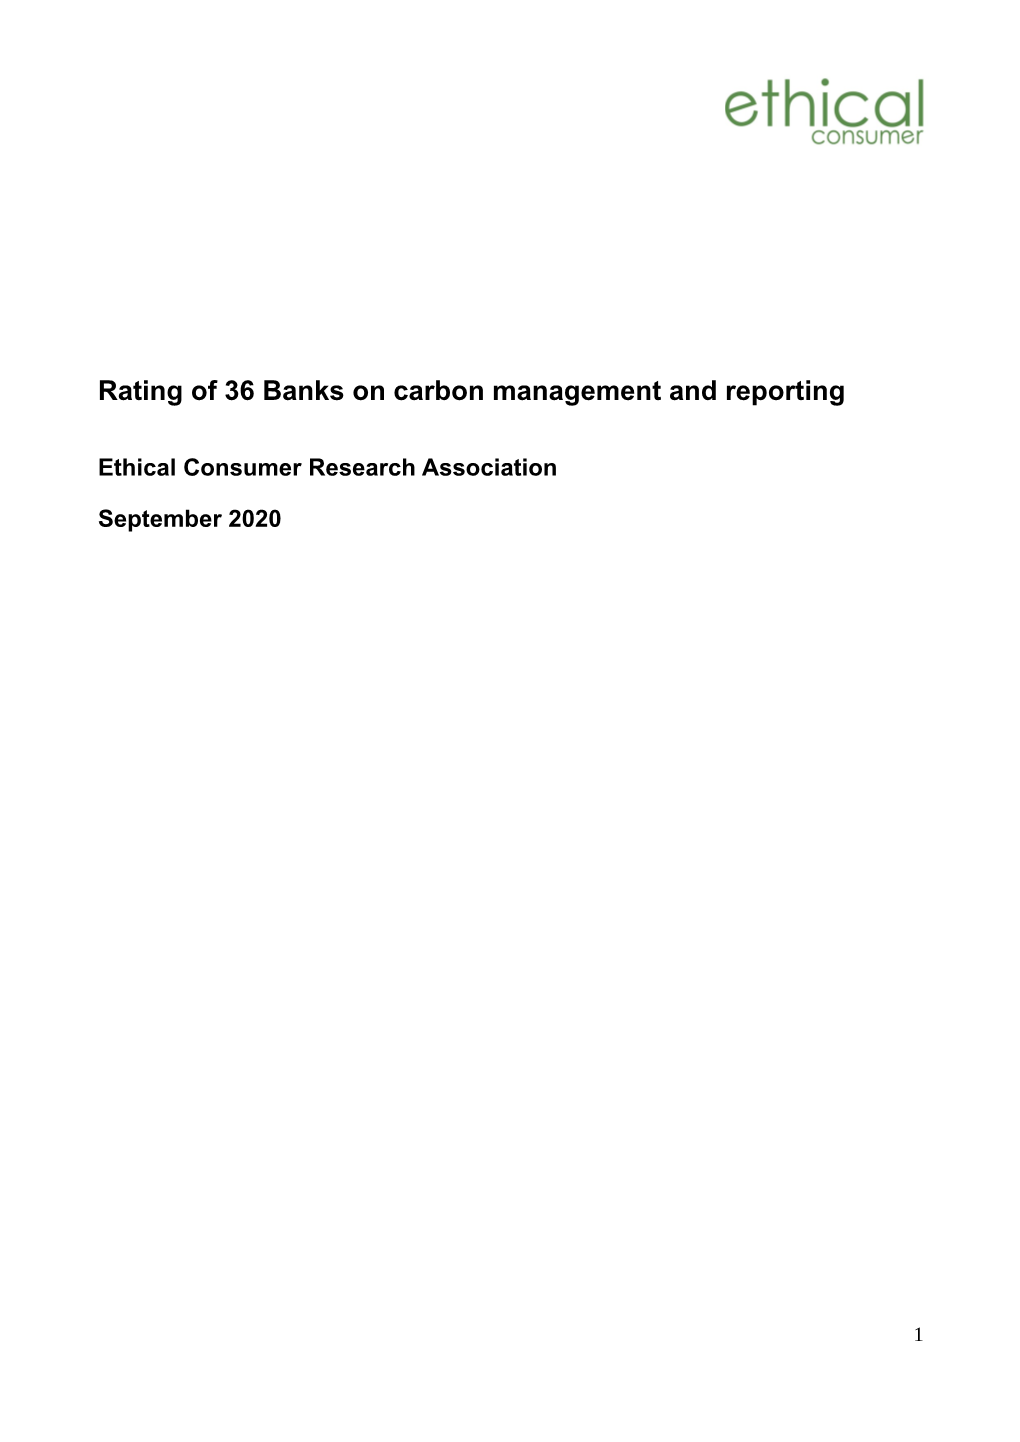 Rating of 36 Banks on Carbon Management and Reporting